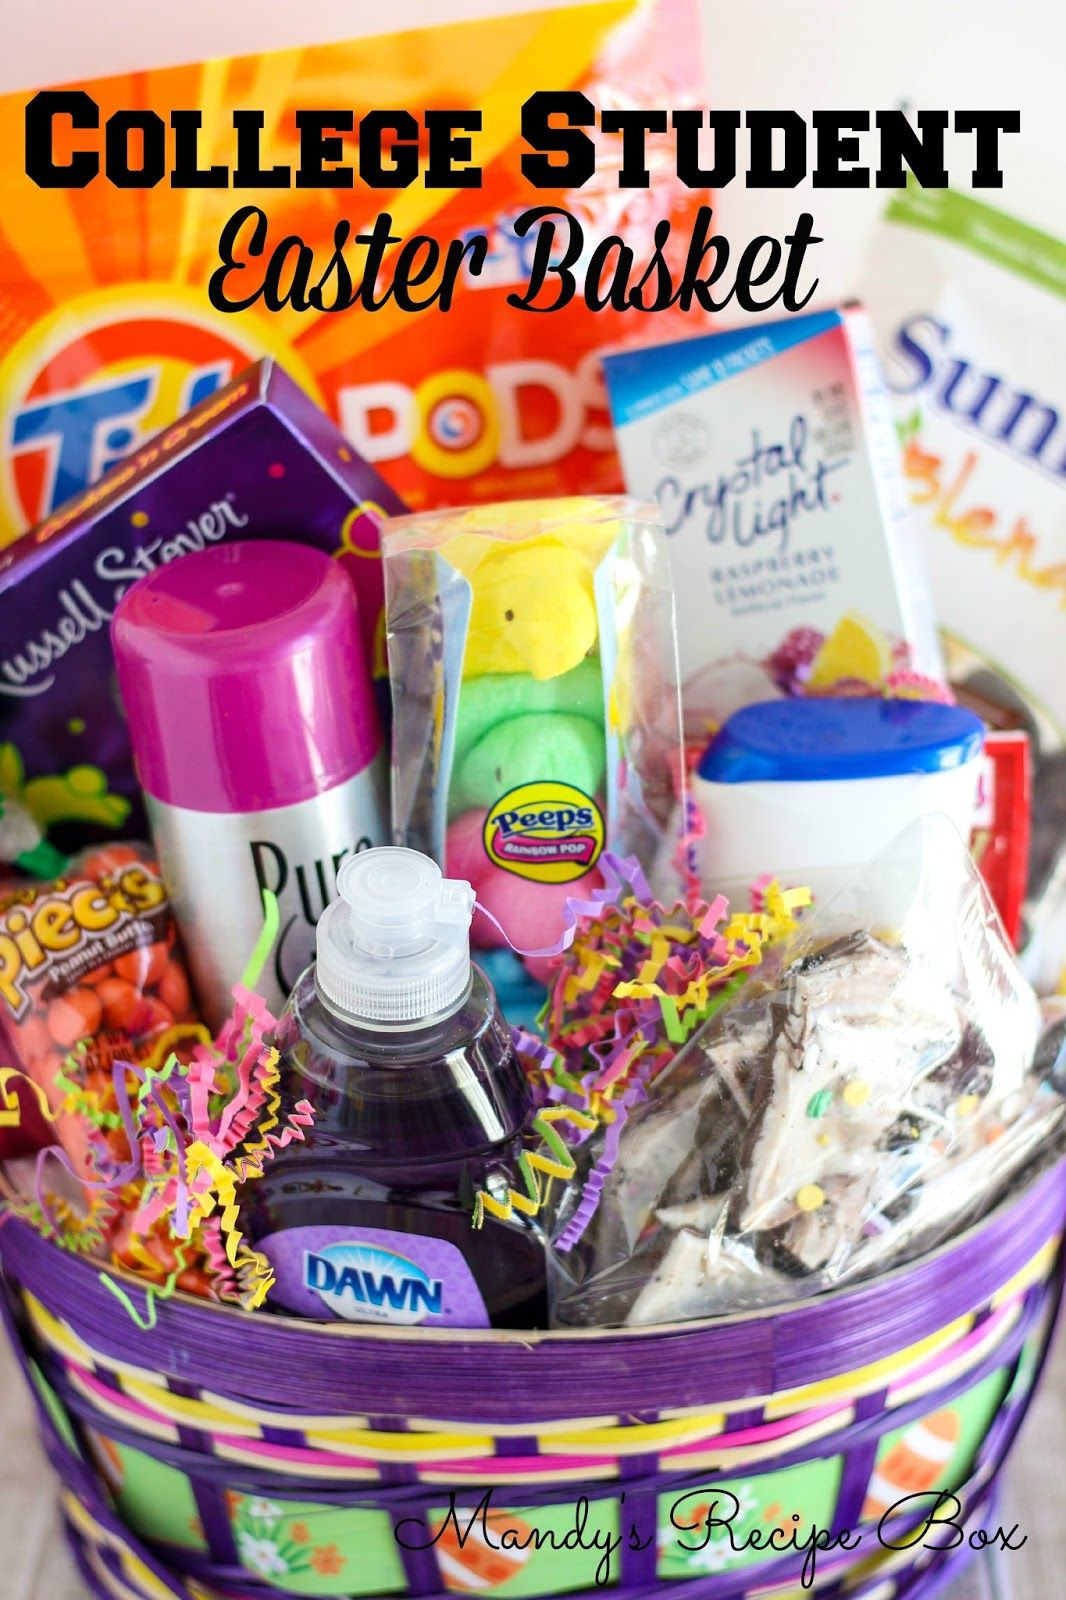 Gift Baskets For College Students Ideas
 College Student Easter Basket With images